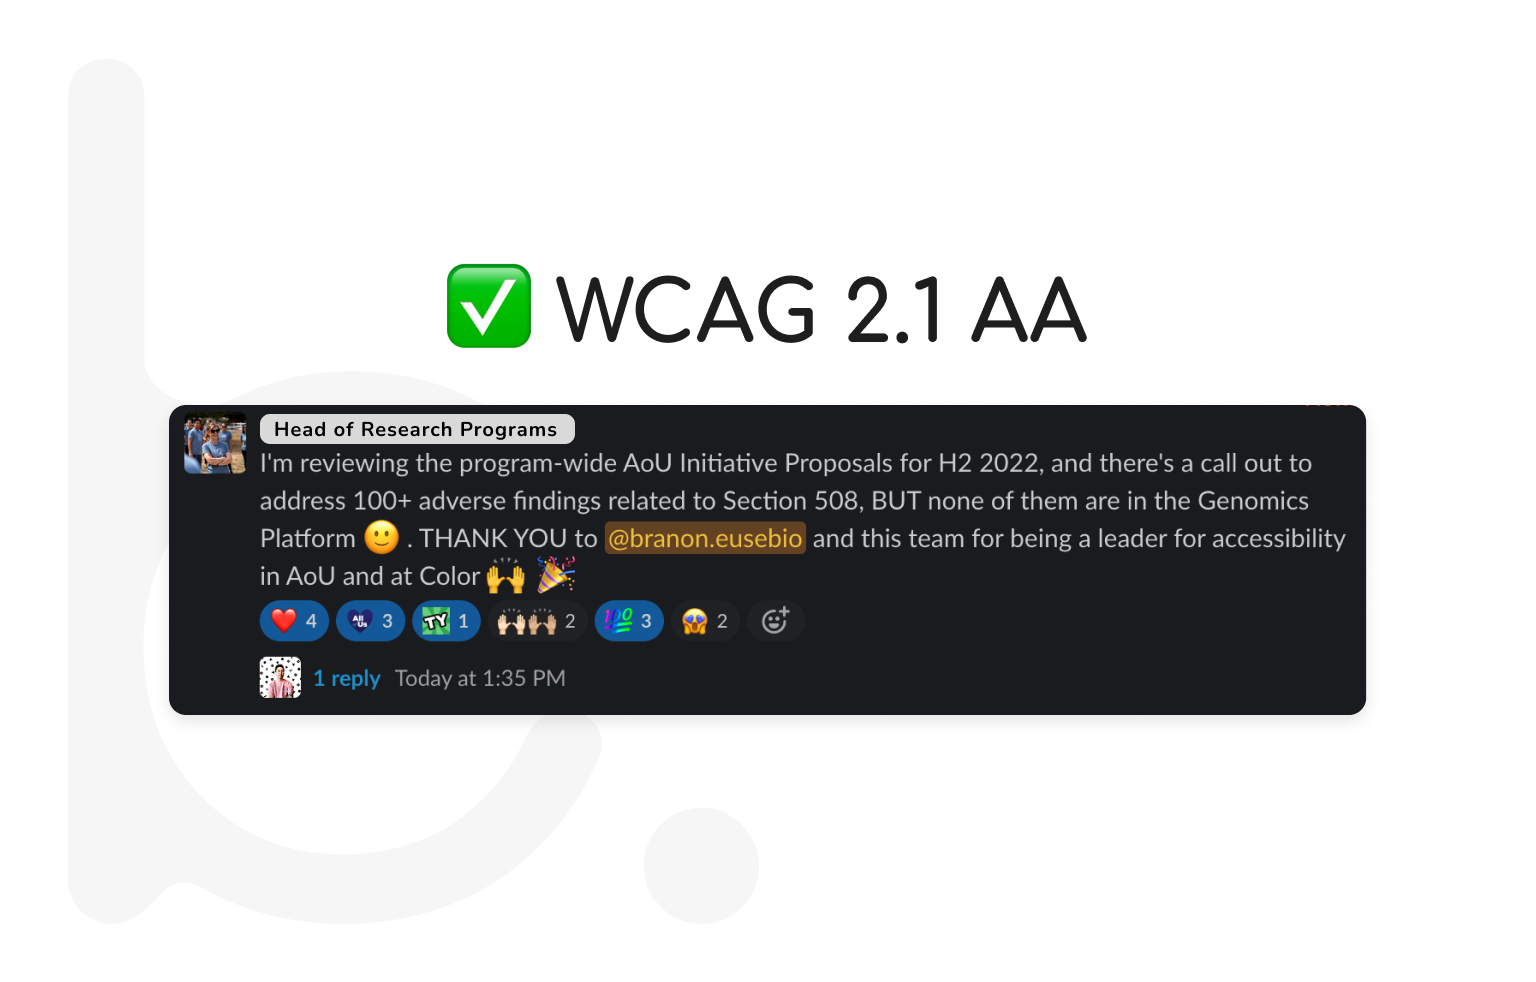 WCAG 2.1 AA compliance reached in our product